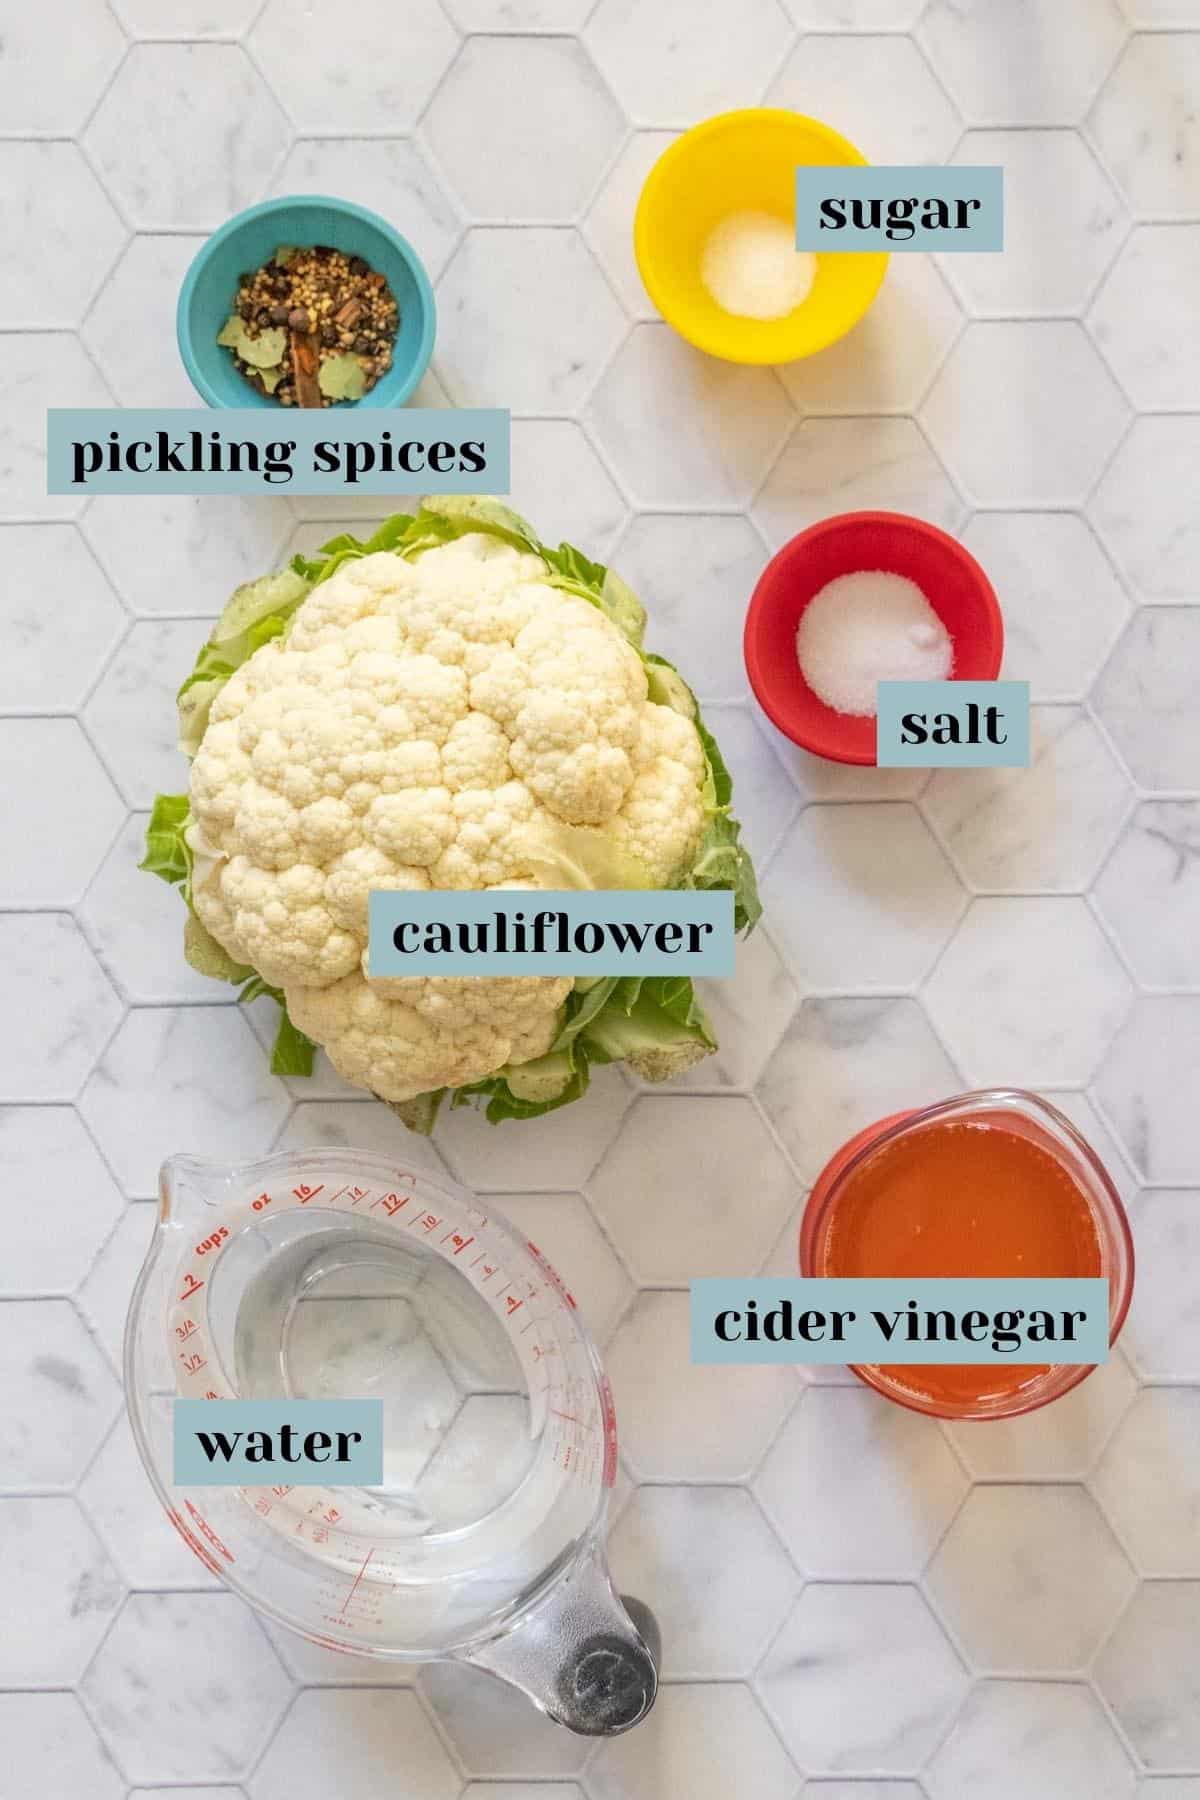 Ingredients for pickled cauliflower on a tile surface with labels.